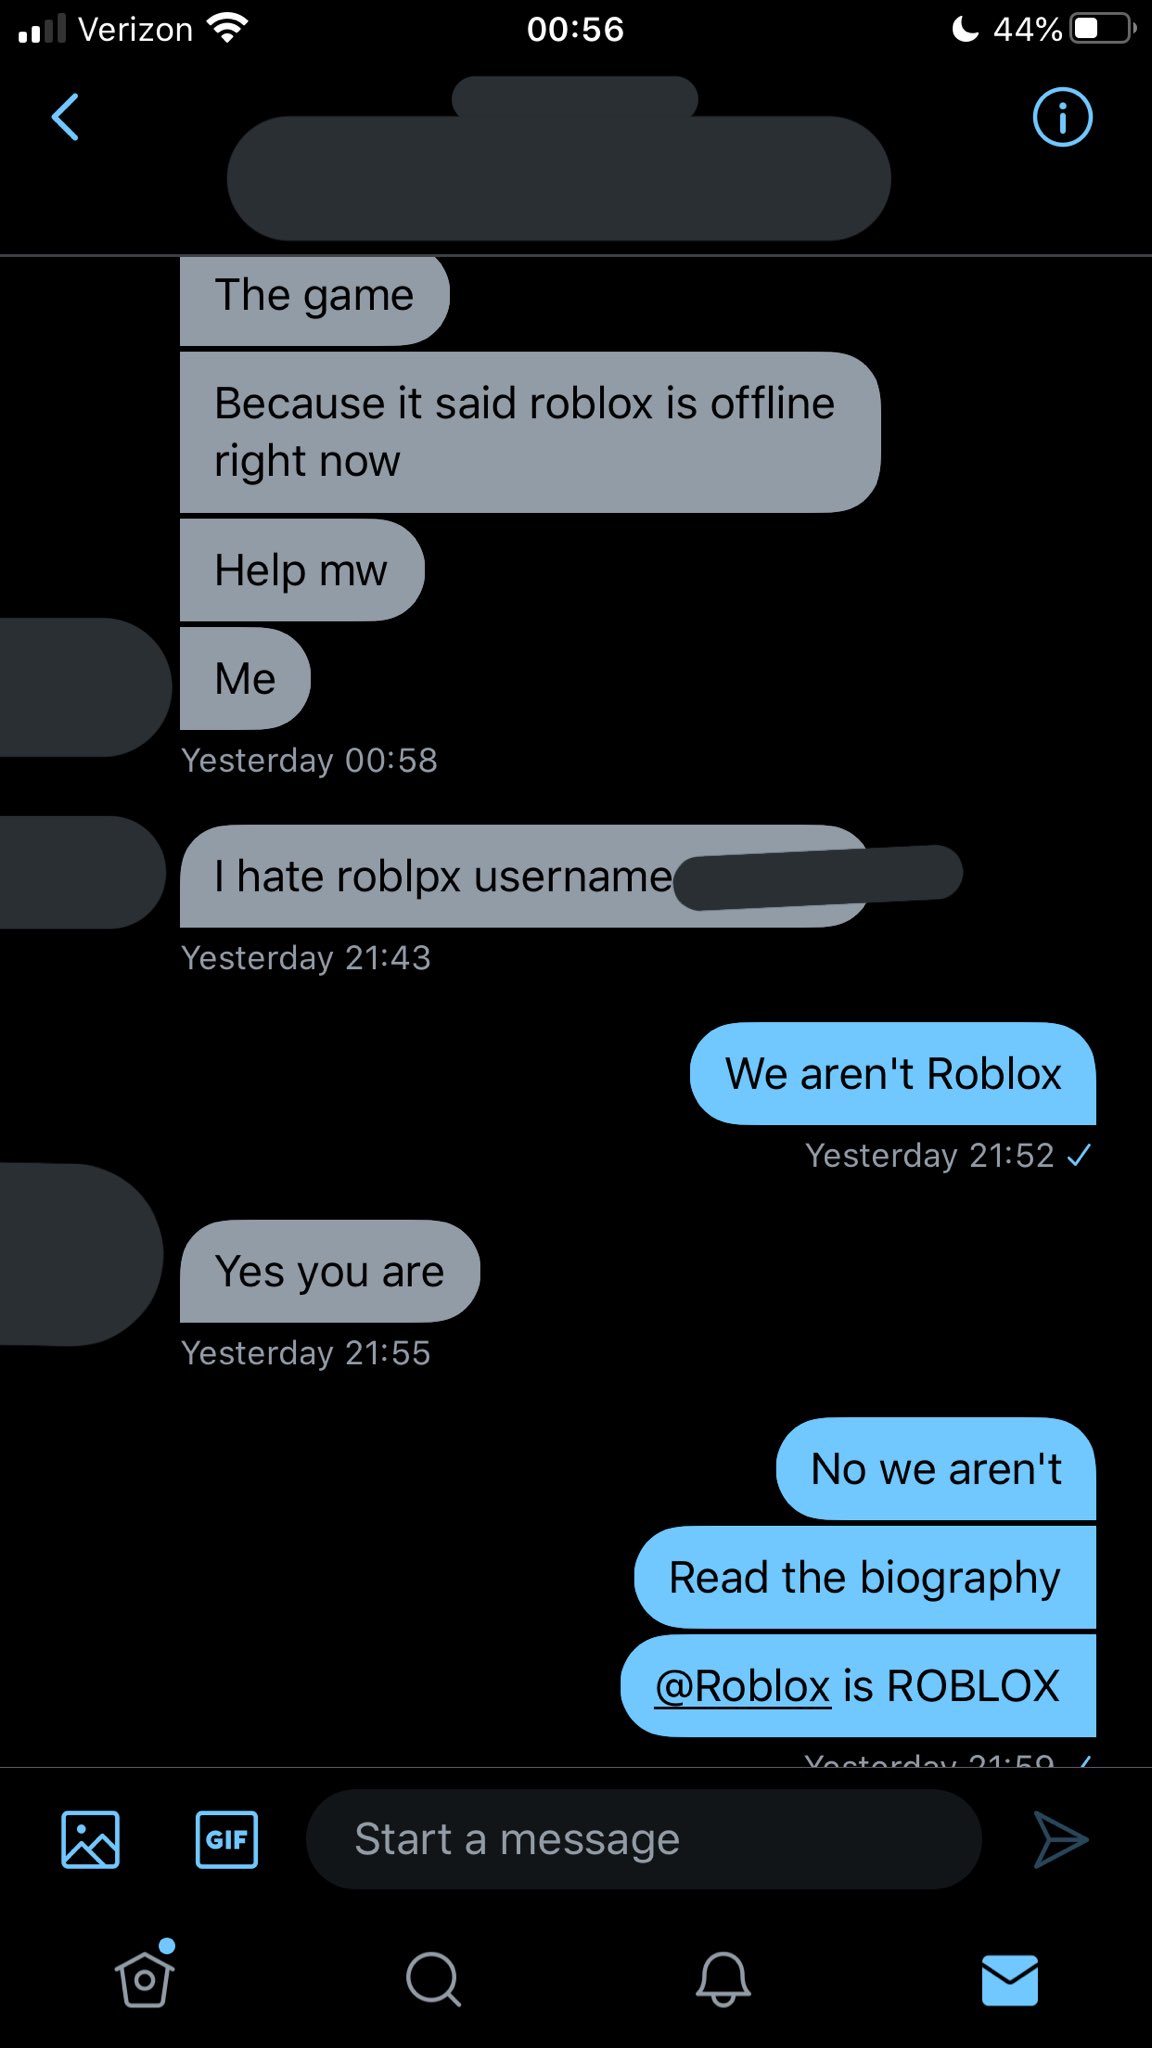 Rtc On Twitter Hello We Ve Put In Our Bio That We Aren T Roblox But Once Again We Ll Say That We Aren T Roblox We Re Just A News Account I Hope You Can Understand - 1152x2048 roblox